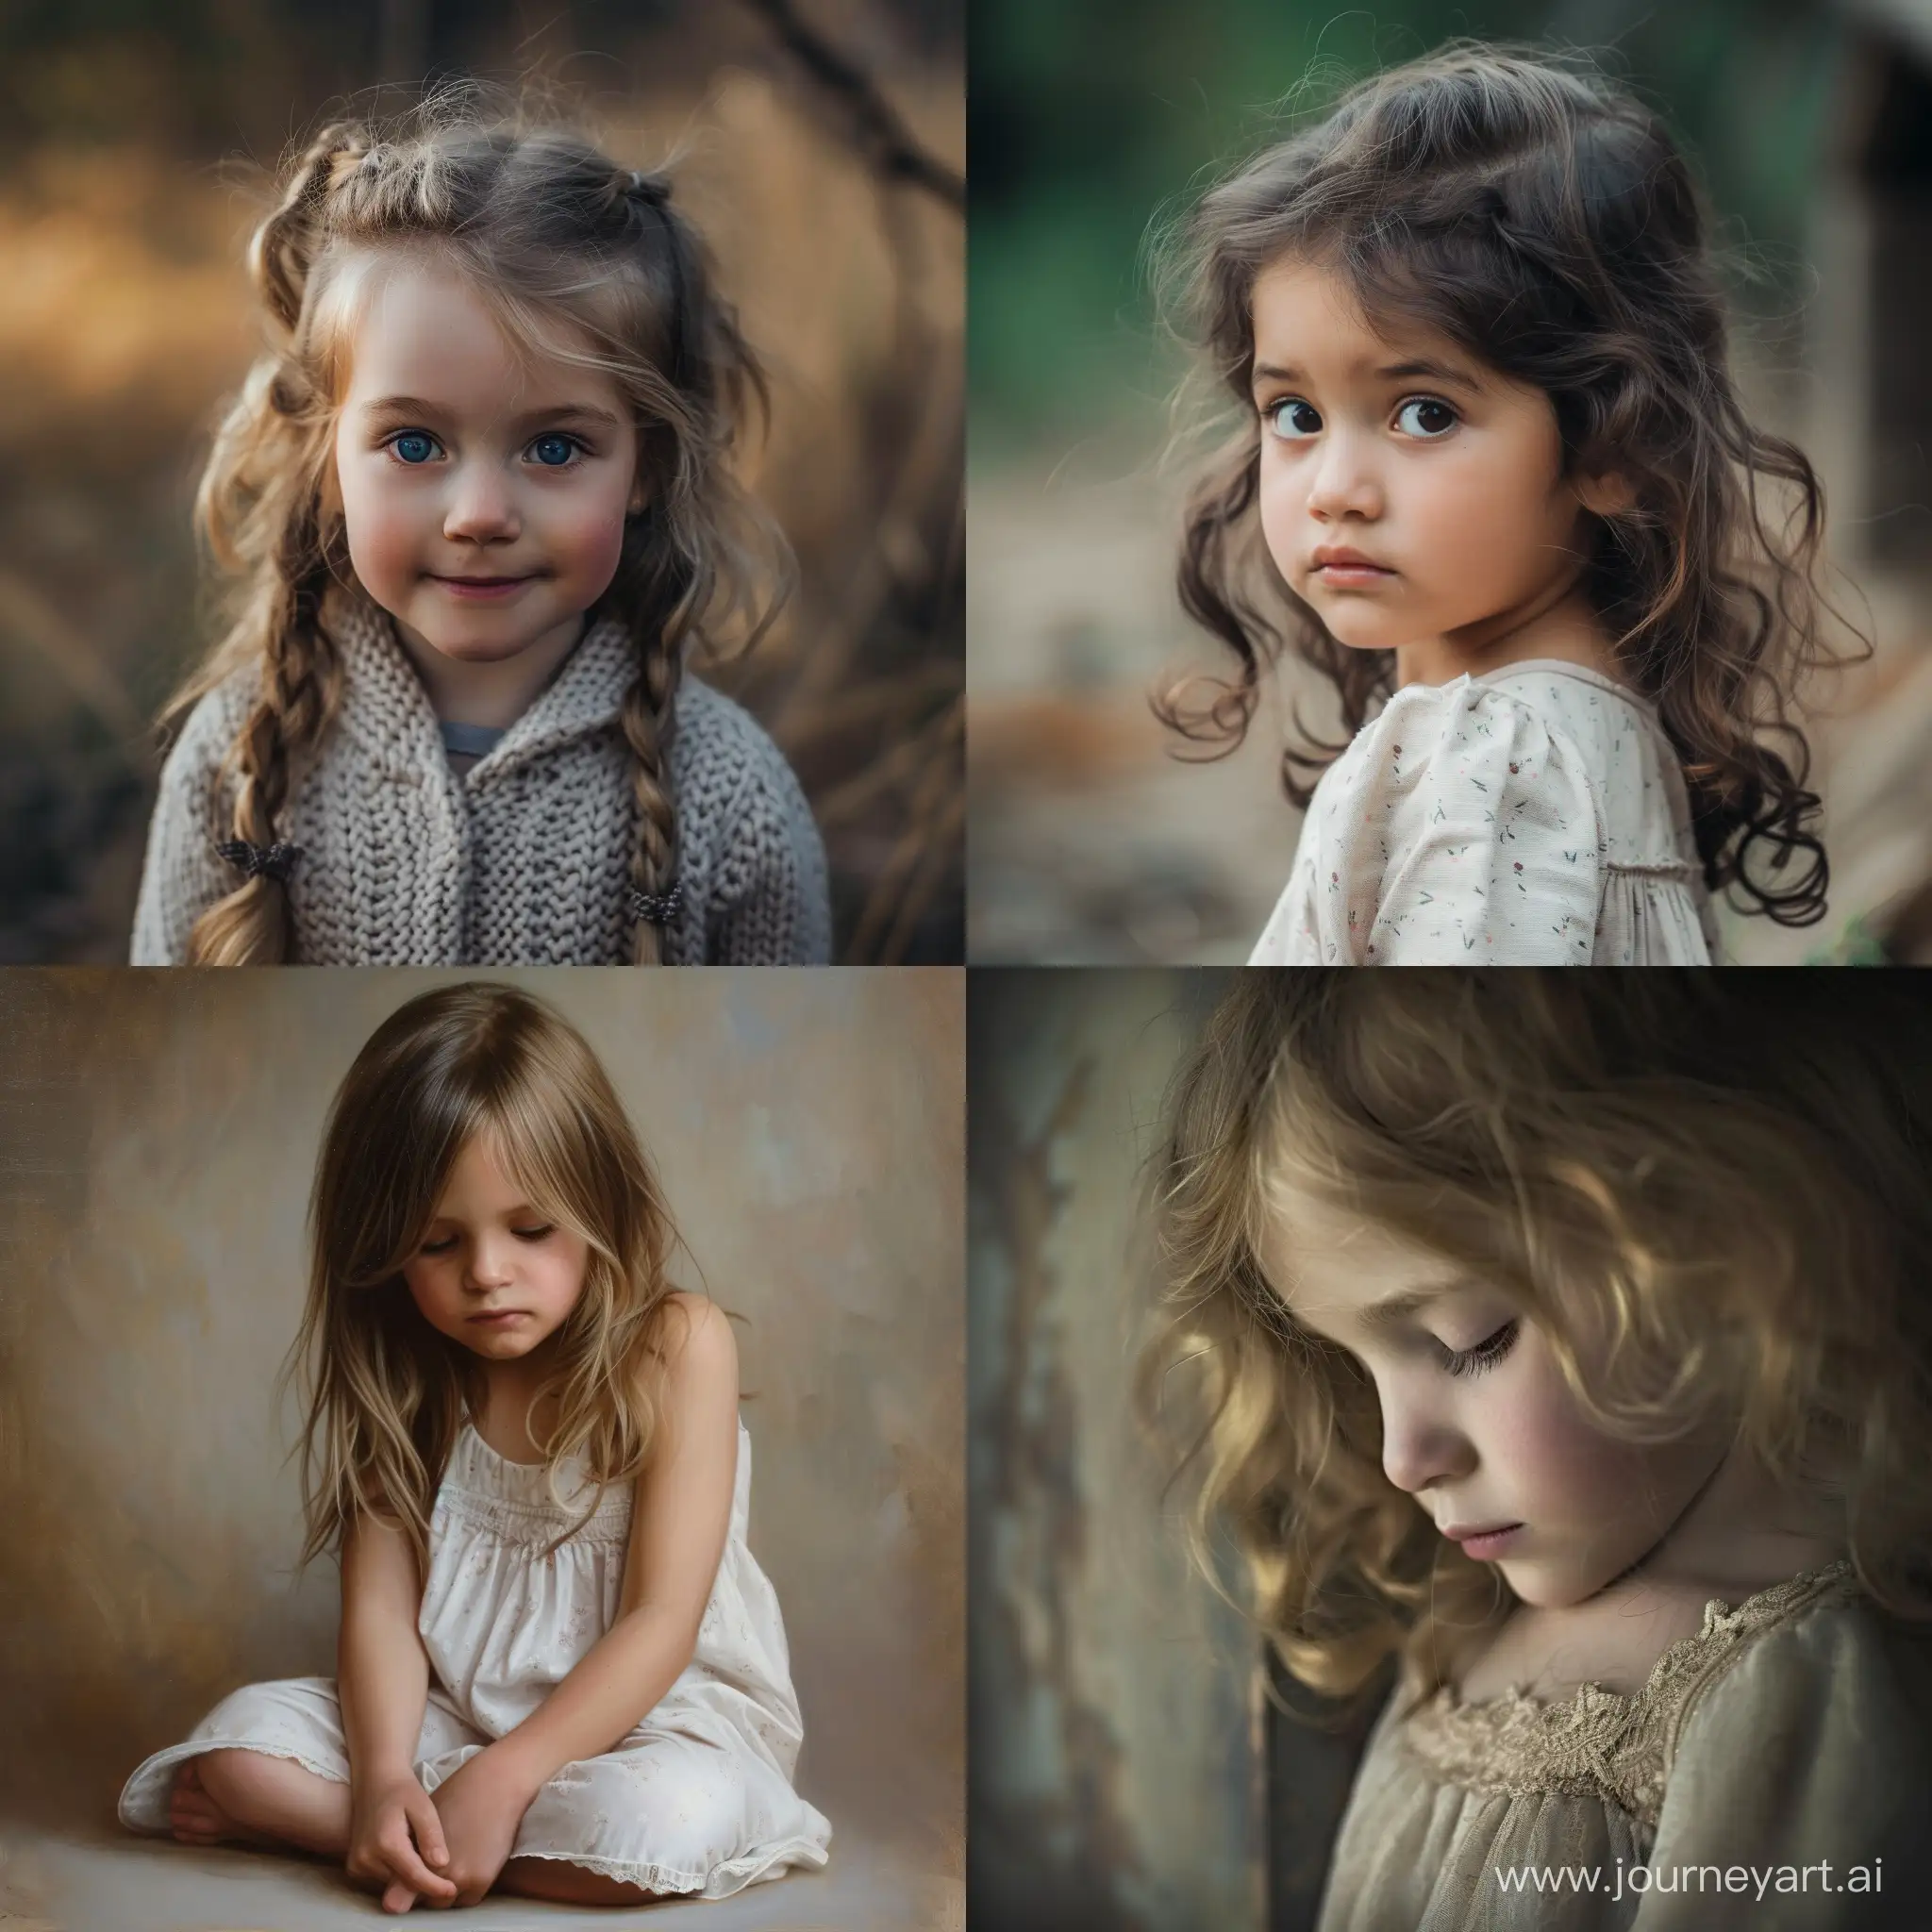 Adorable-Little-Girl-with-a-Playful-Expression